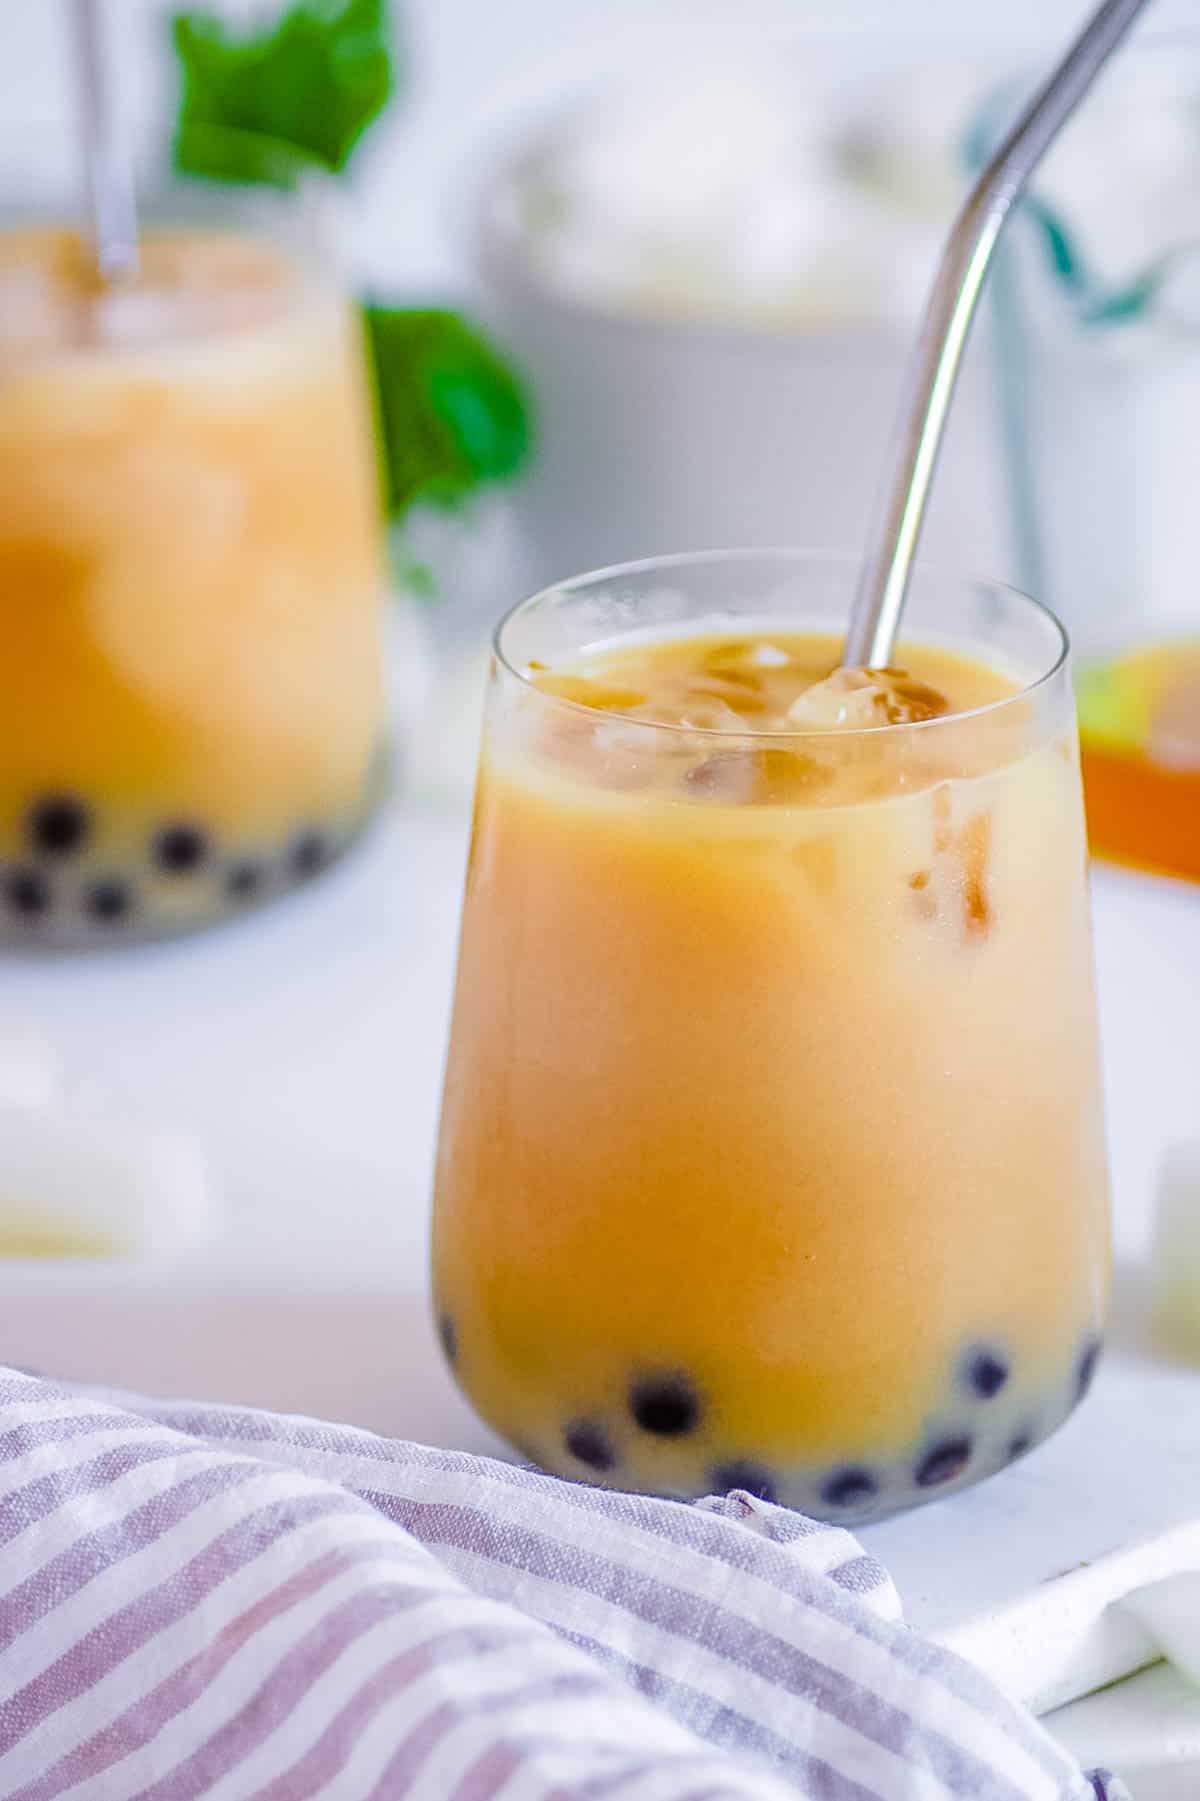 Easy wintermelon milk tea with boba pearls in a glass with a straw.